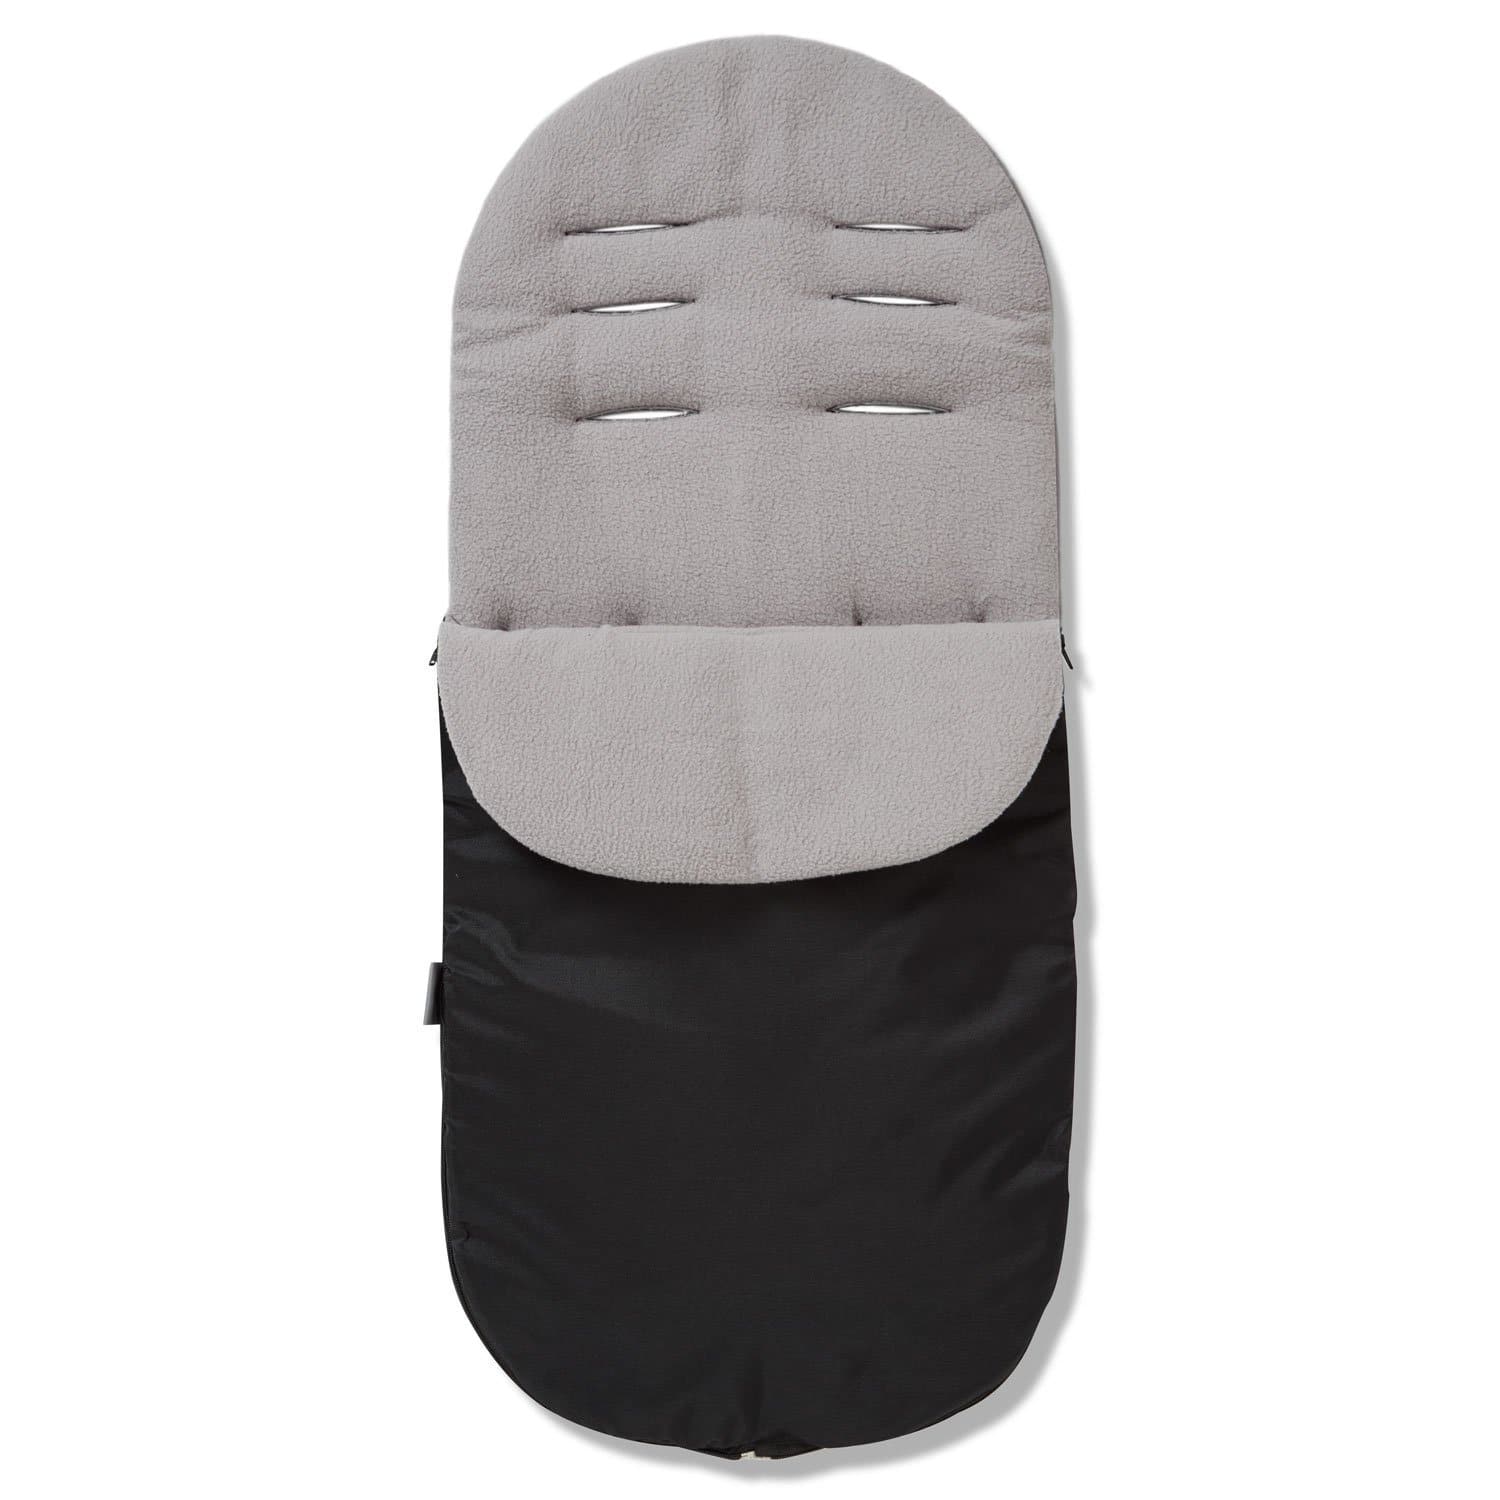 Footmuff / Cosy Toes Compatible with Infababy - Grey / Fits All Models | For Your Little One